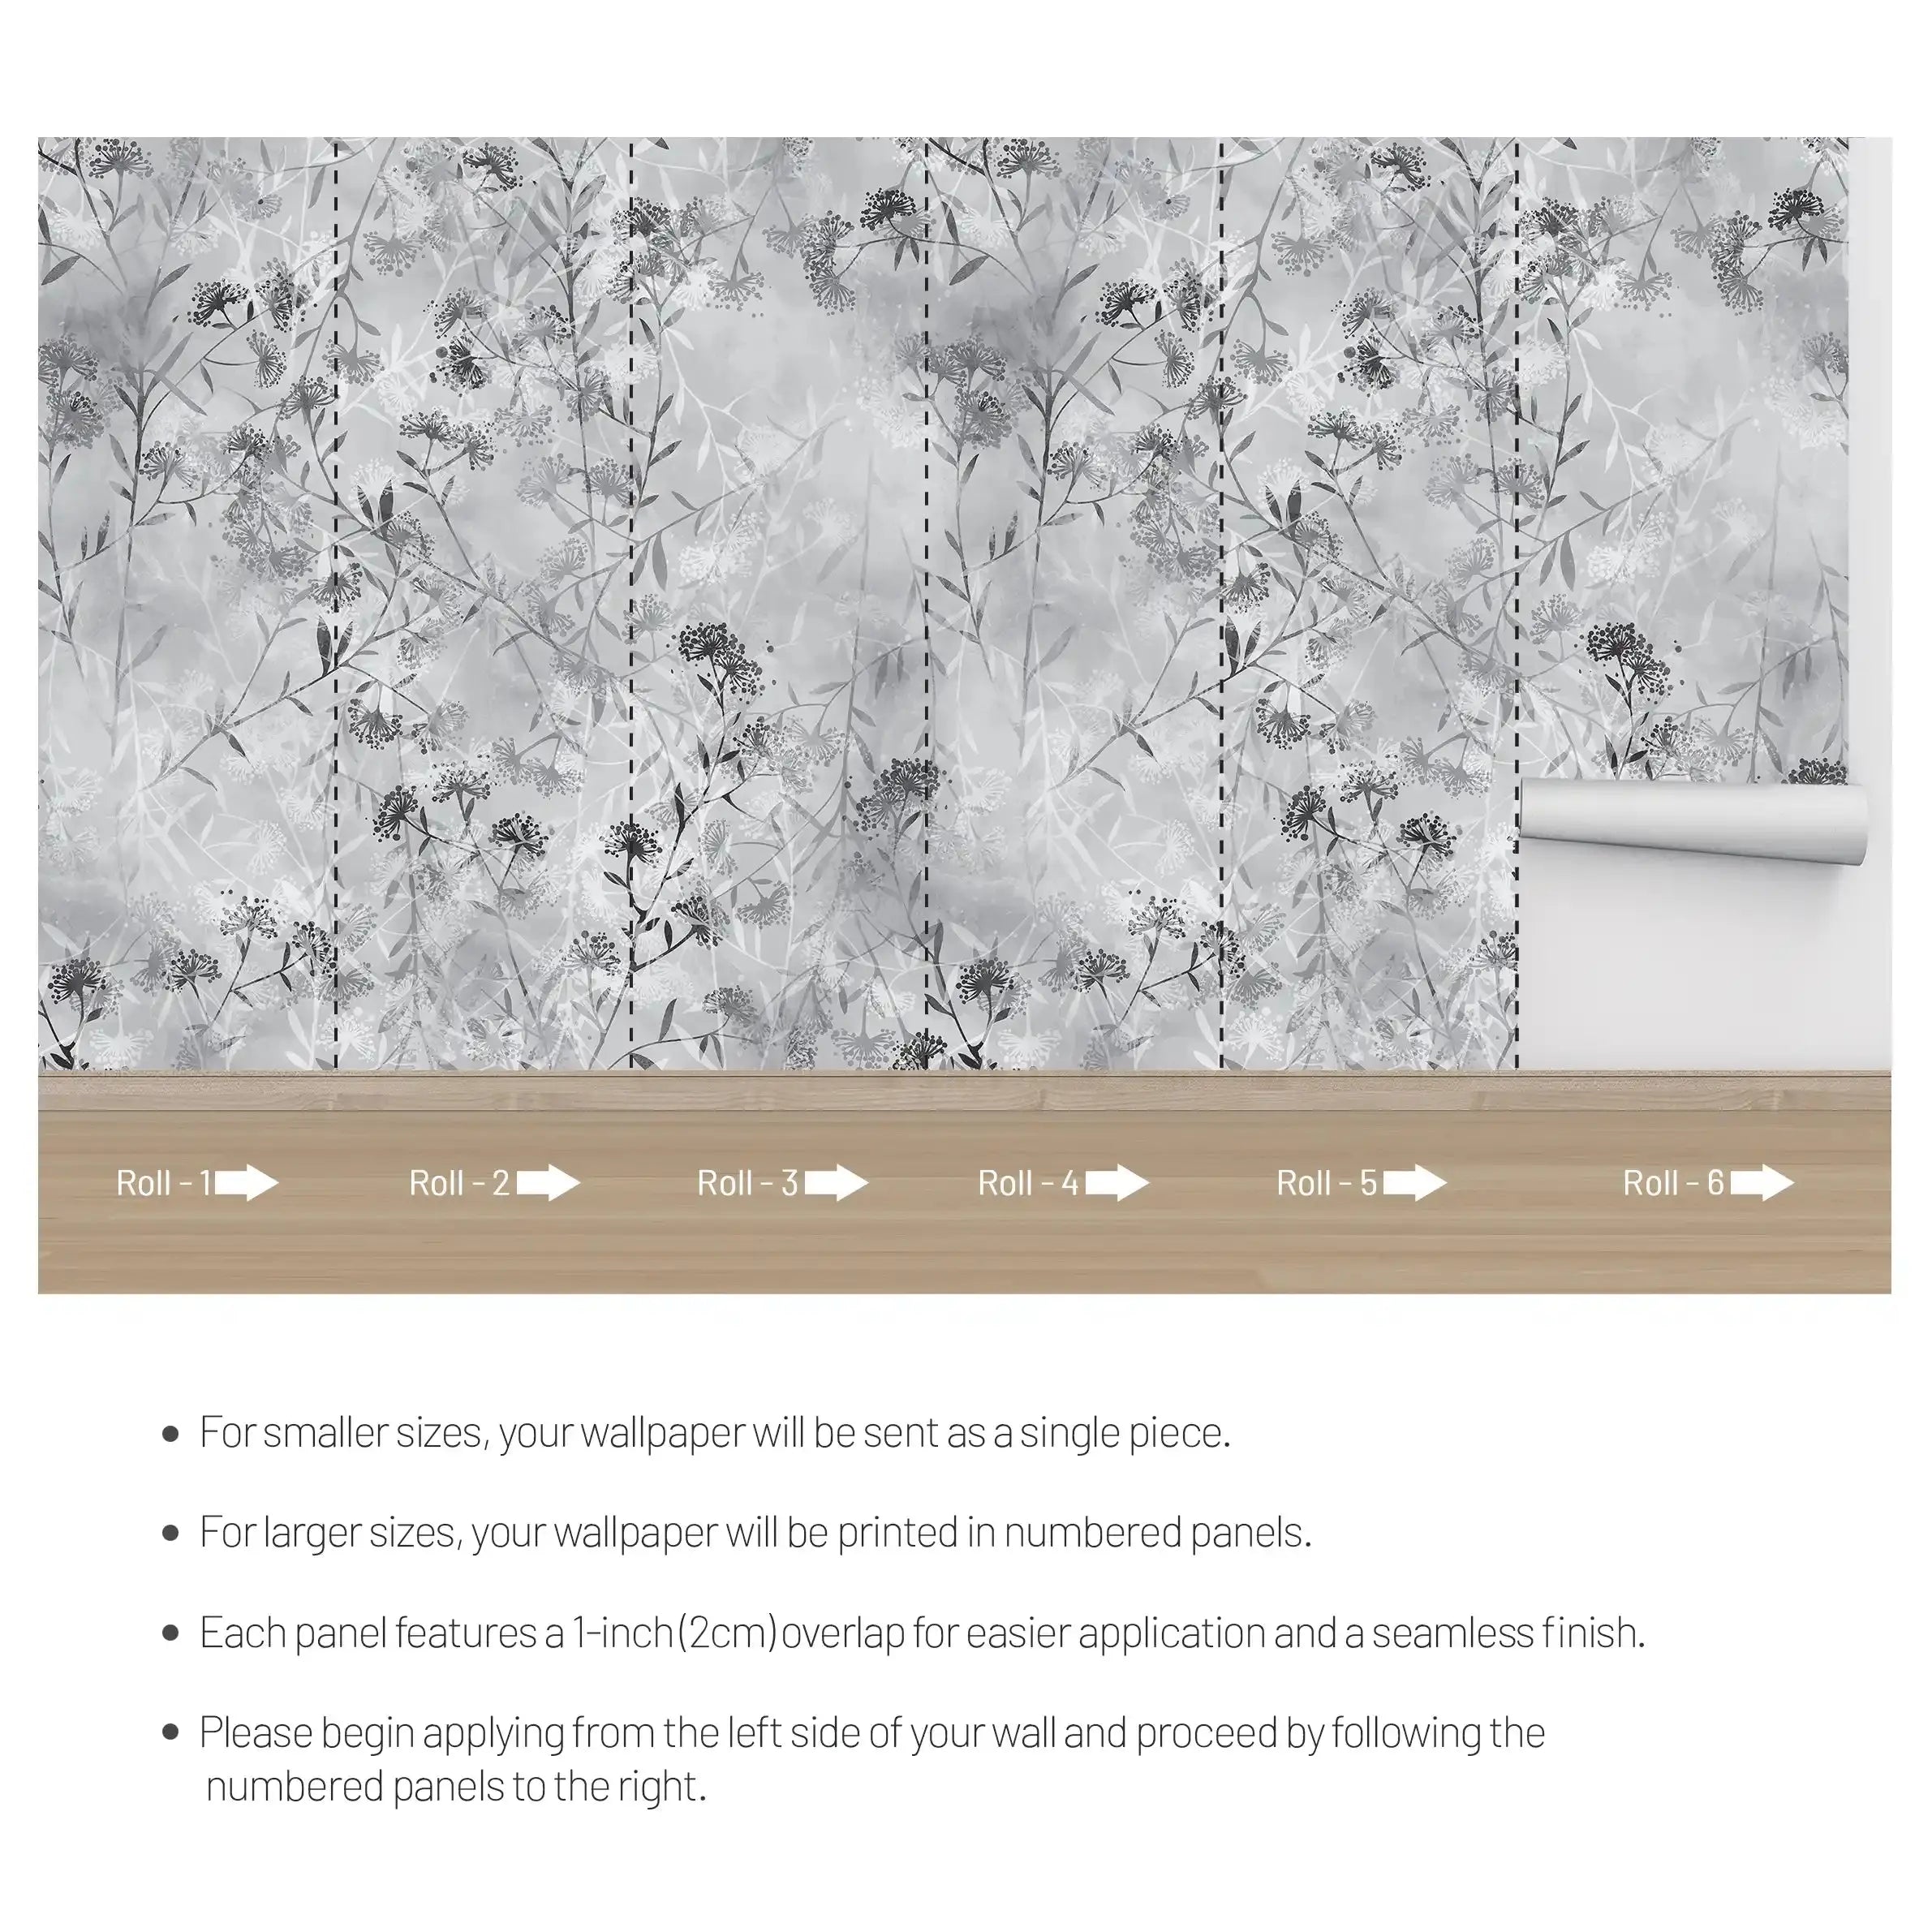 3009-E / Wild Floral Wall Mural - Grey Patterned Peel and Stick Wallpaper for Bedroom and Bathroom - Artevella